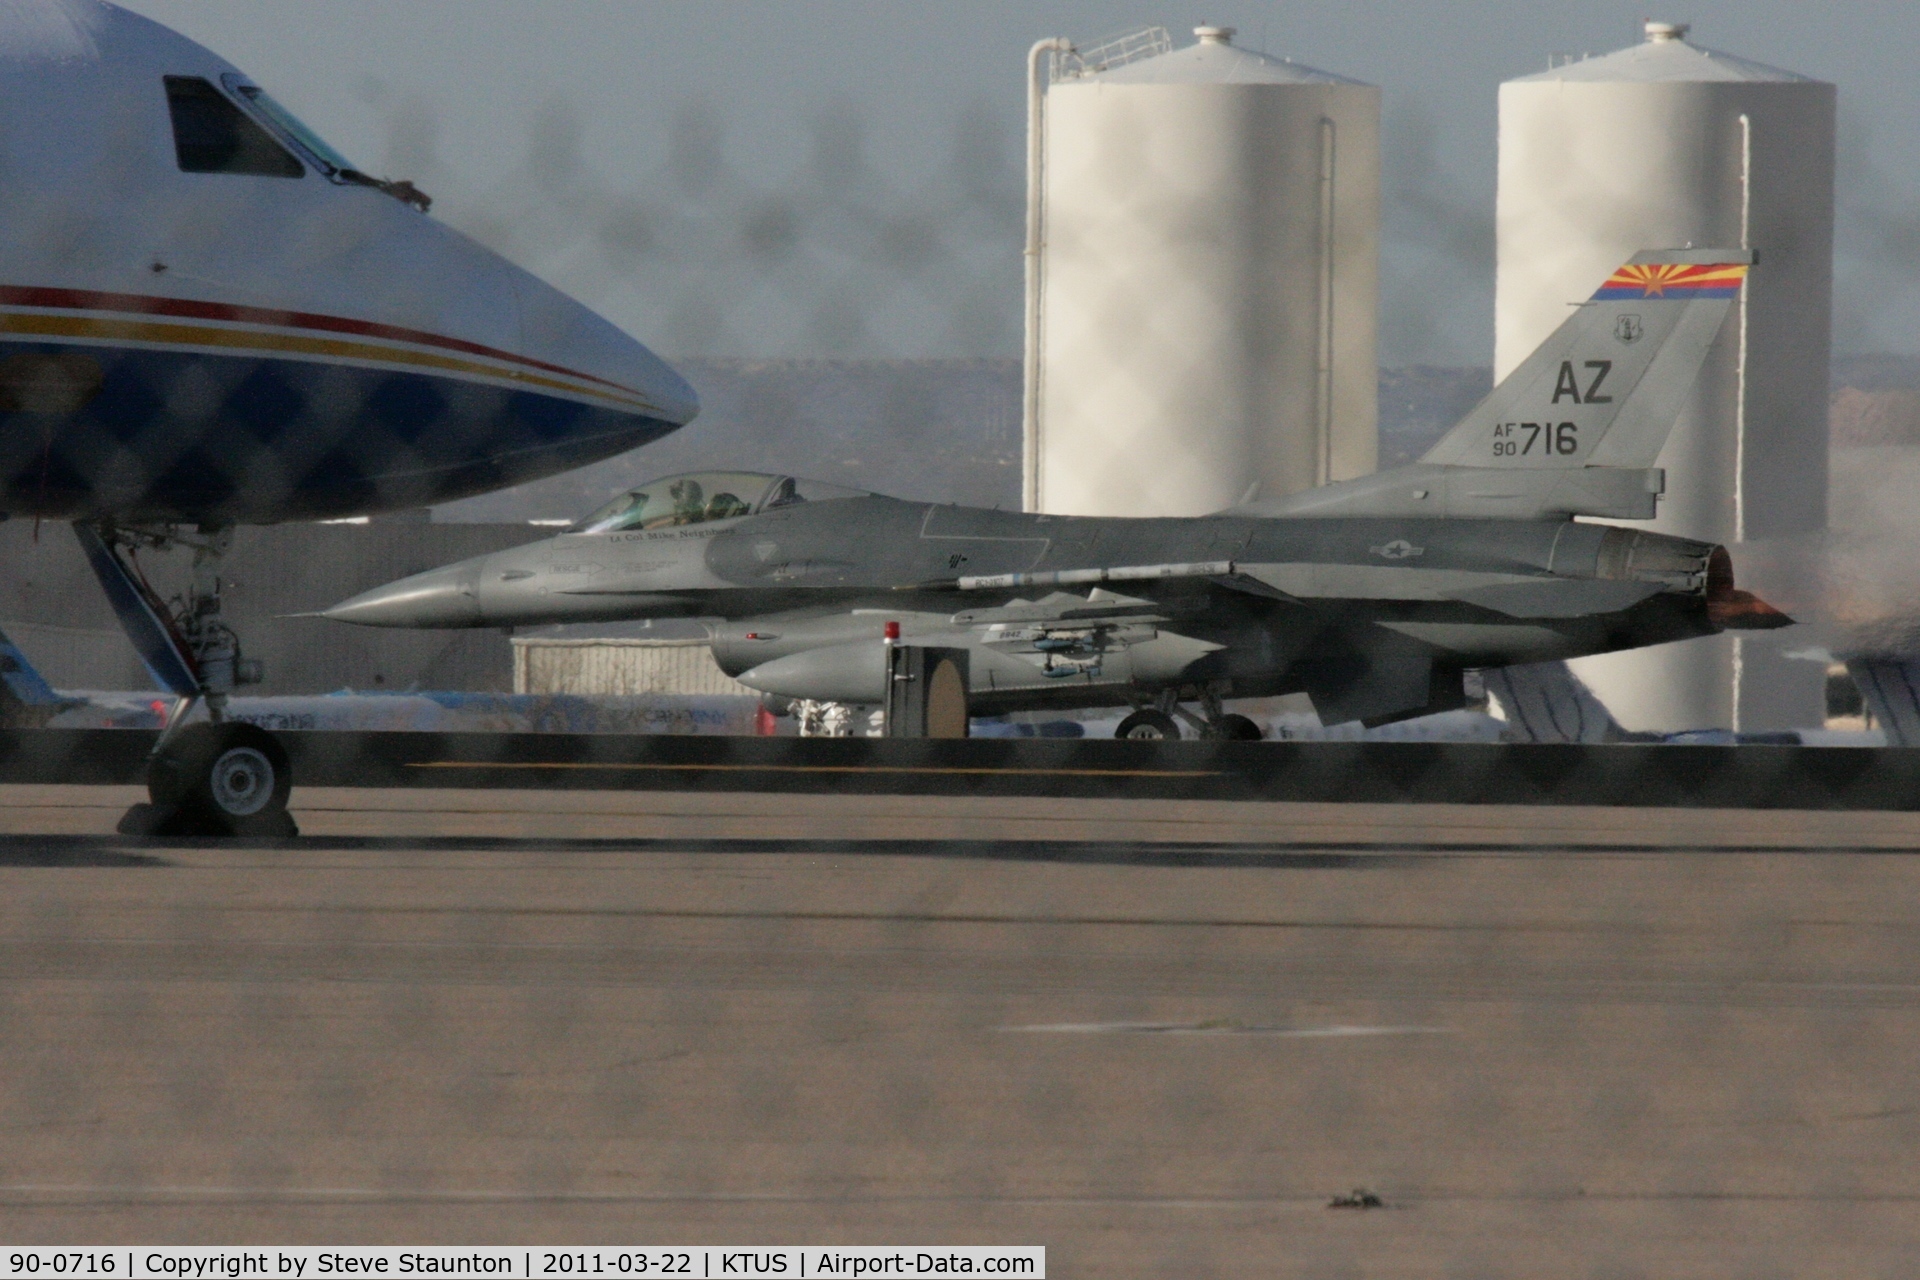 90-0716, General Dynamics F-16C C/N 1C-324, Taken at Tucson International Airport, in March 2011 whilst on an Aeroprint Aviation tour